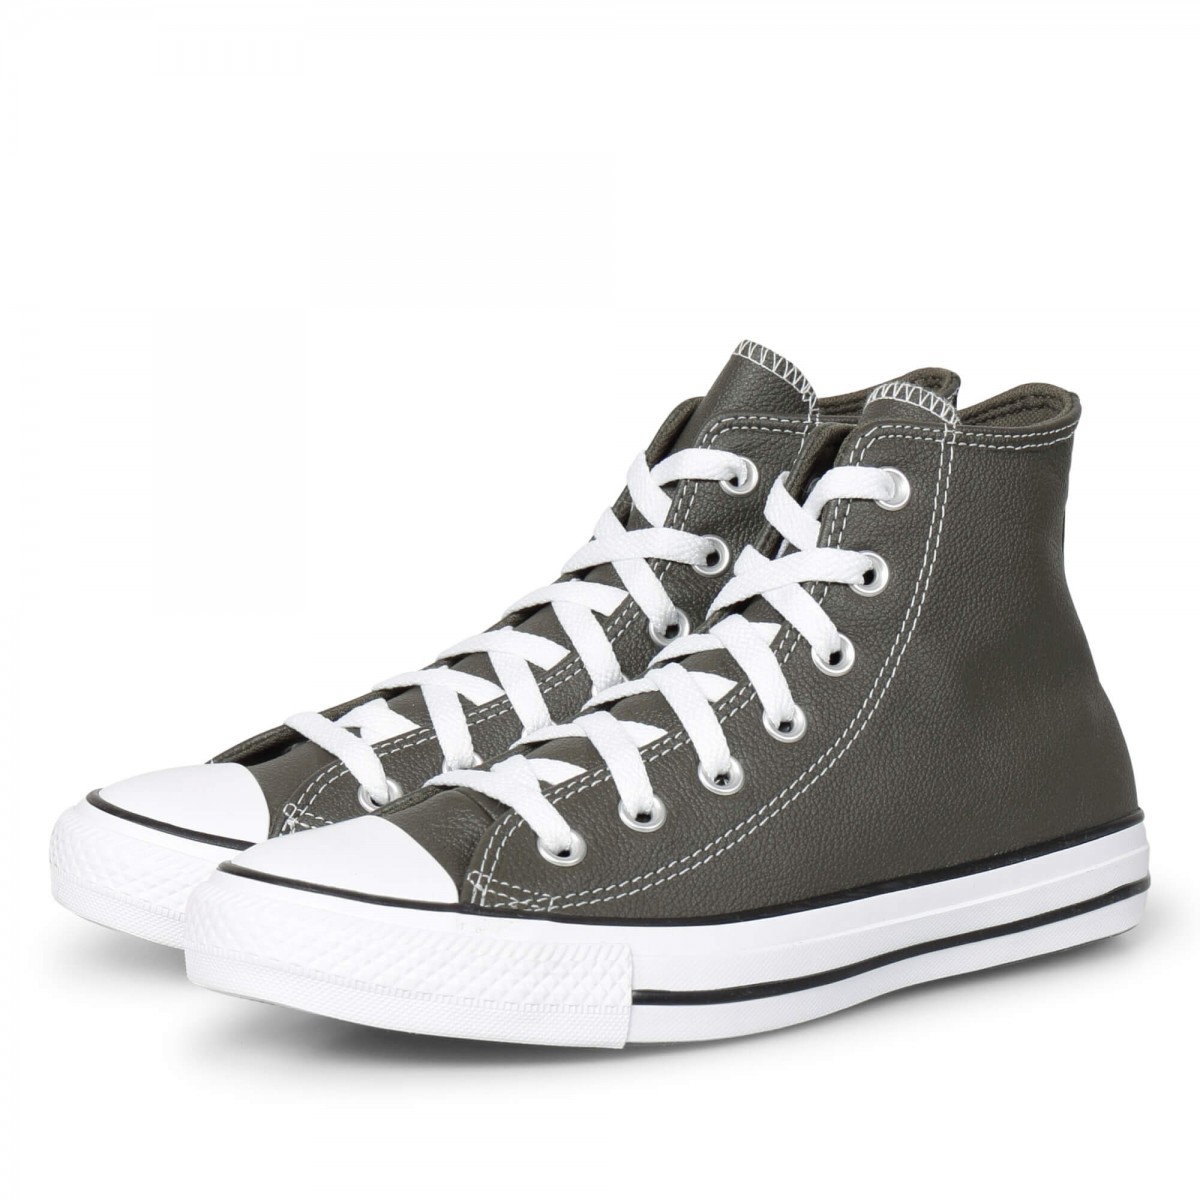 Converse Chuck Taylor All Star Color Leather Khaki - 171461C Χακί